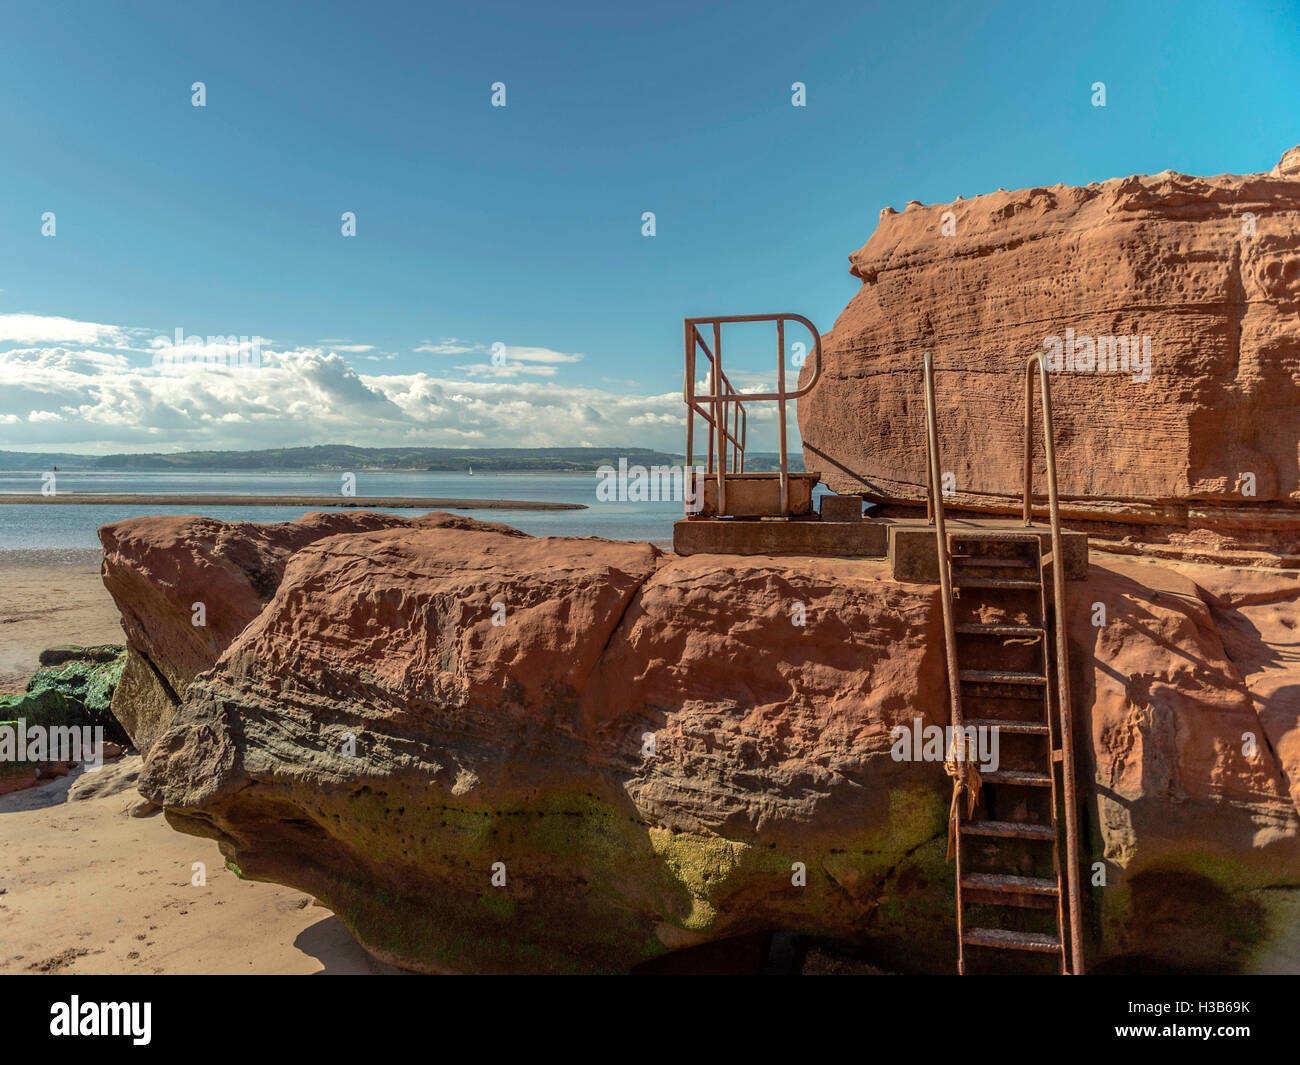 Rustic rock formations visible at low tide and rusting metal gangways at Orcome Point near the seaside town of Exmouth, Devon. Stock Photo